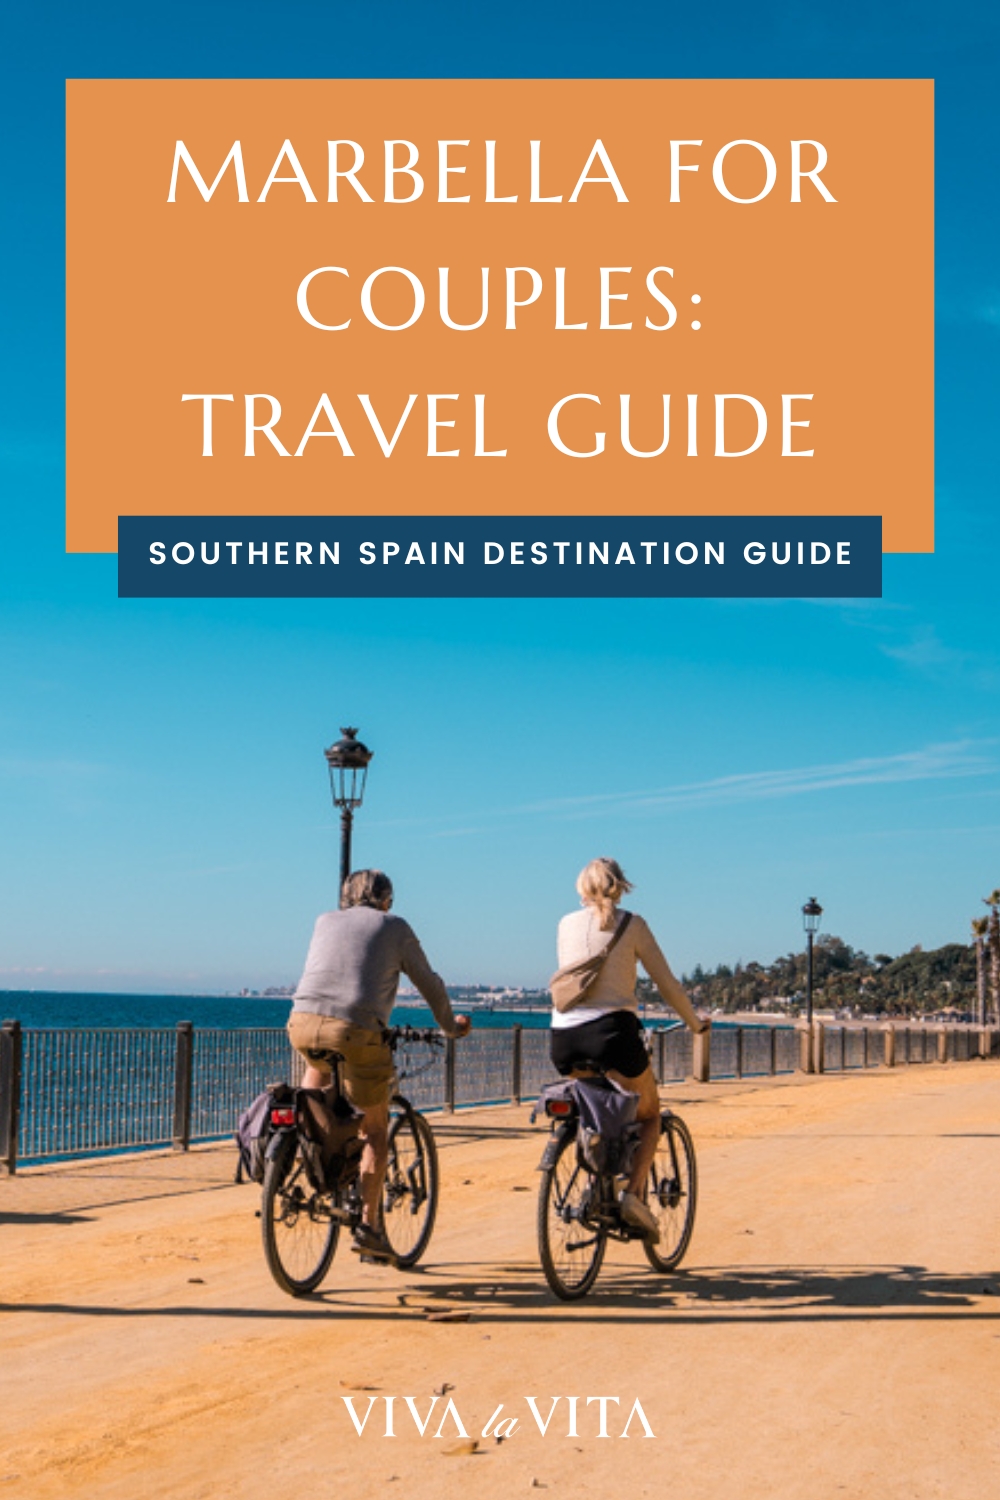 pinterest image showing a couple on the golden mile beach promenade riding a bike, in Marbella on costa del sol, Southern spain, with a headline - marbella for couples: travel guide